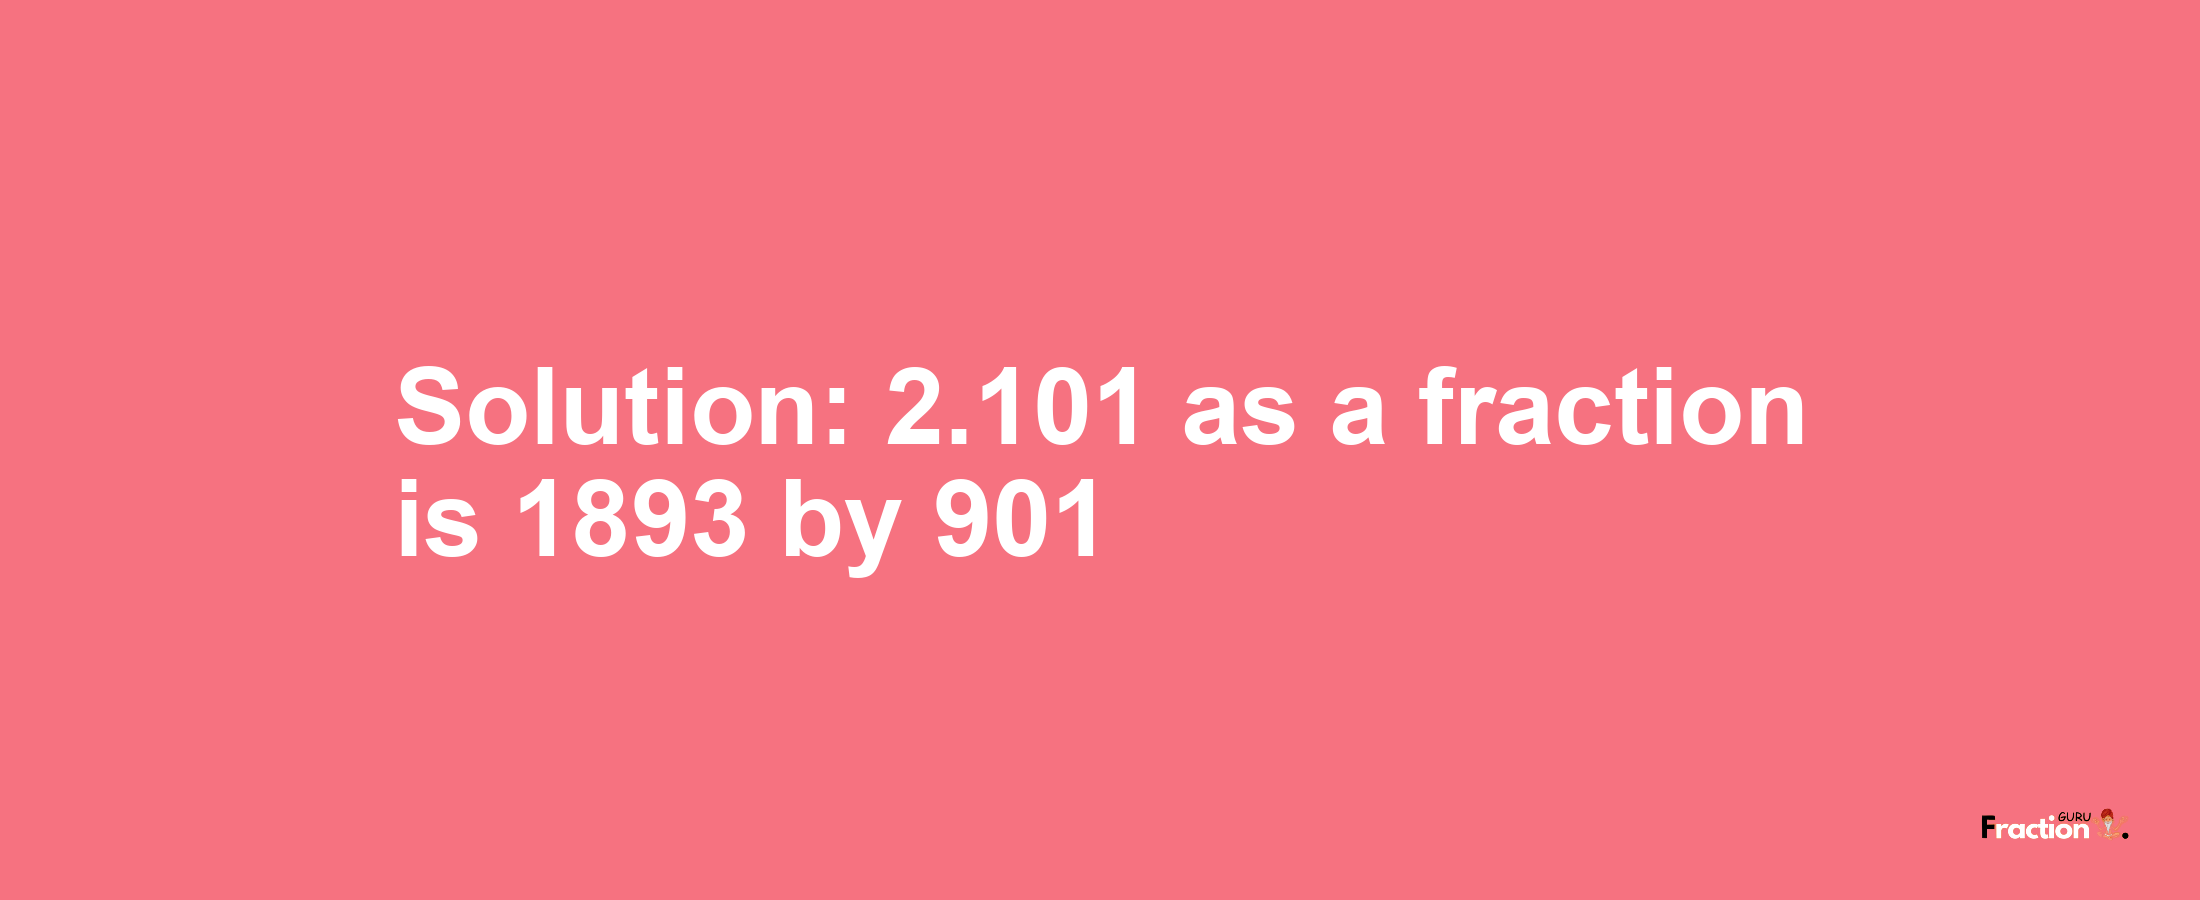 Solution:2.101 as a fraction is 1893/901